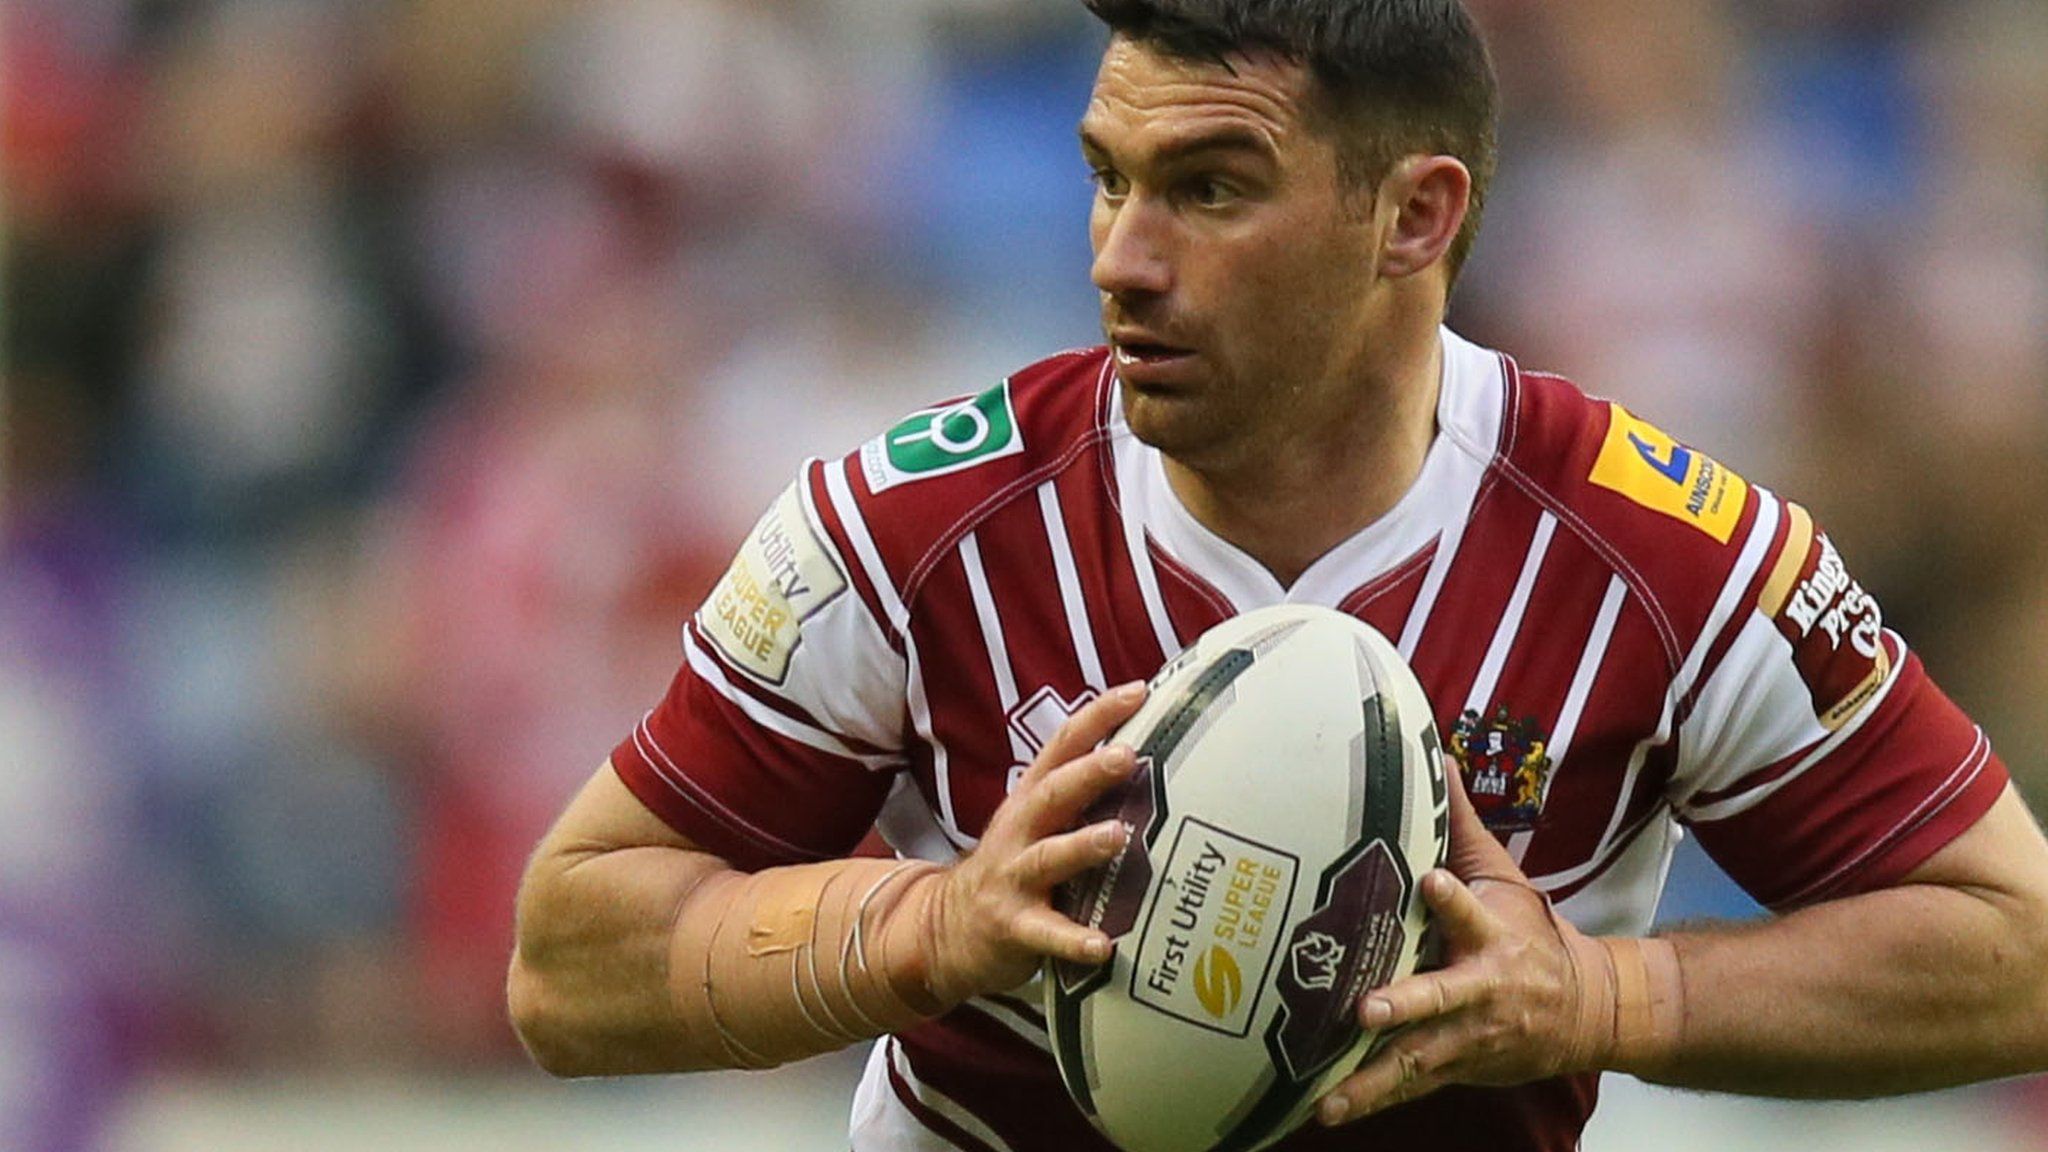 Matty Smith in action for Wigan